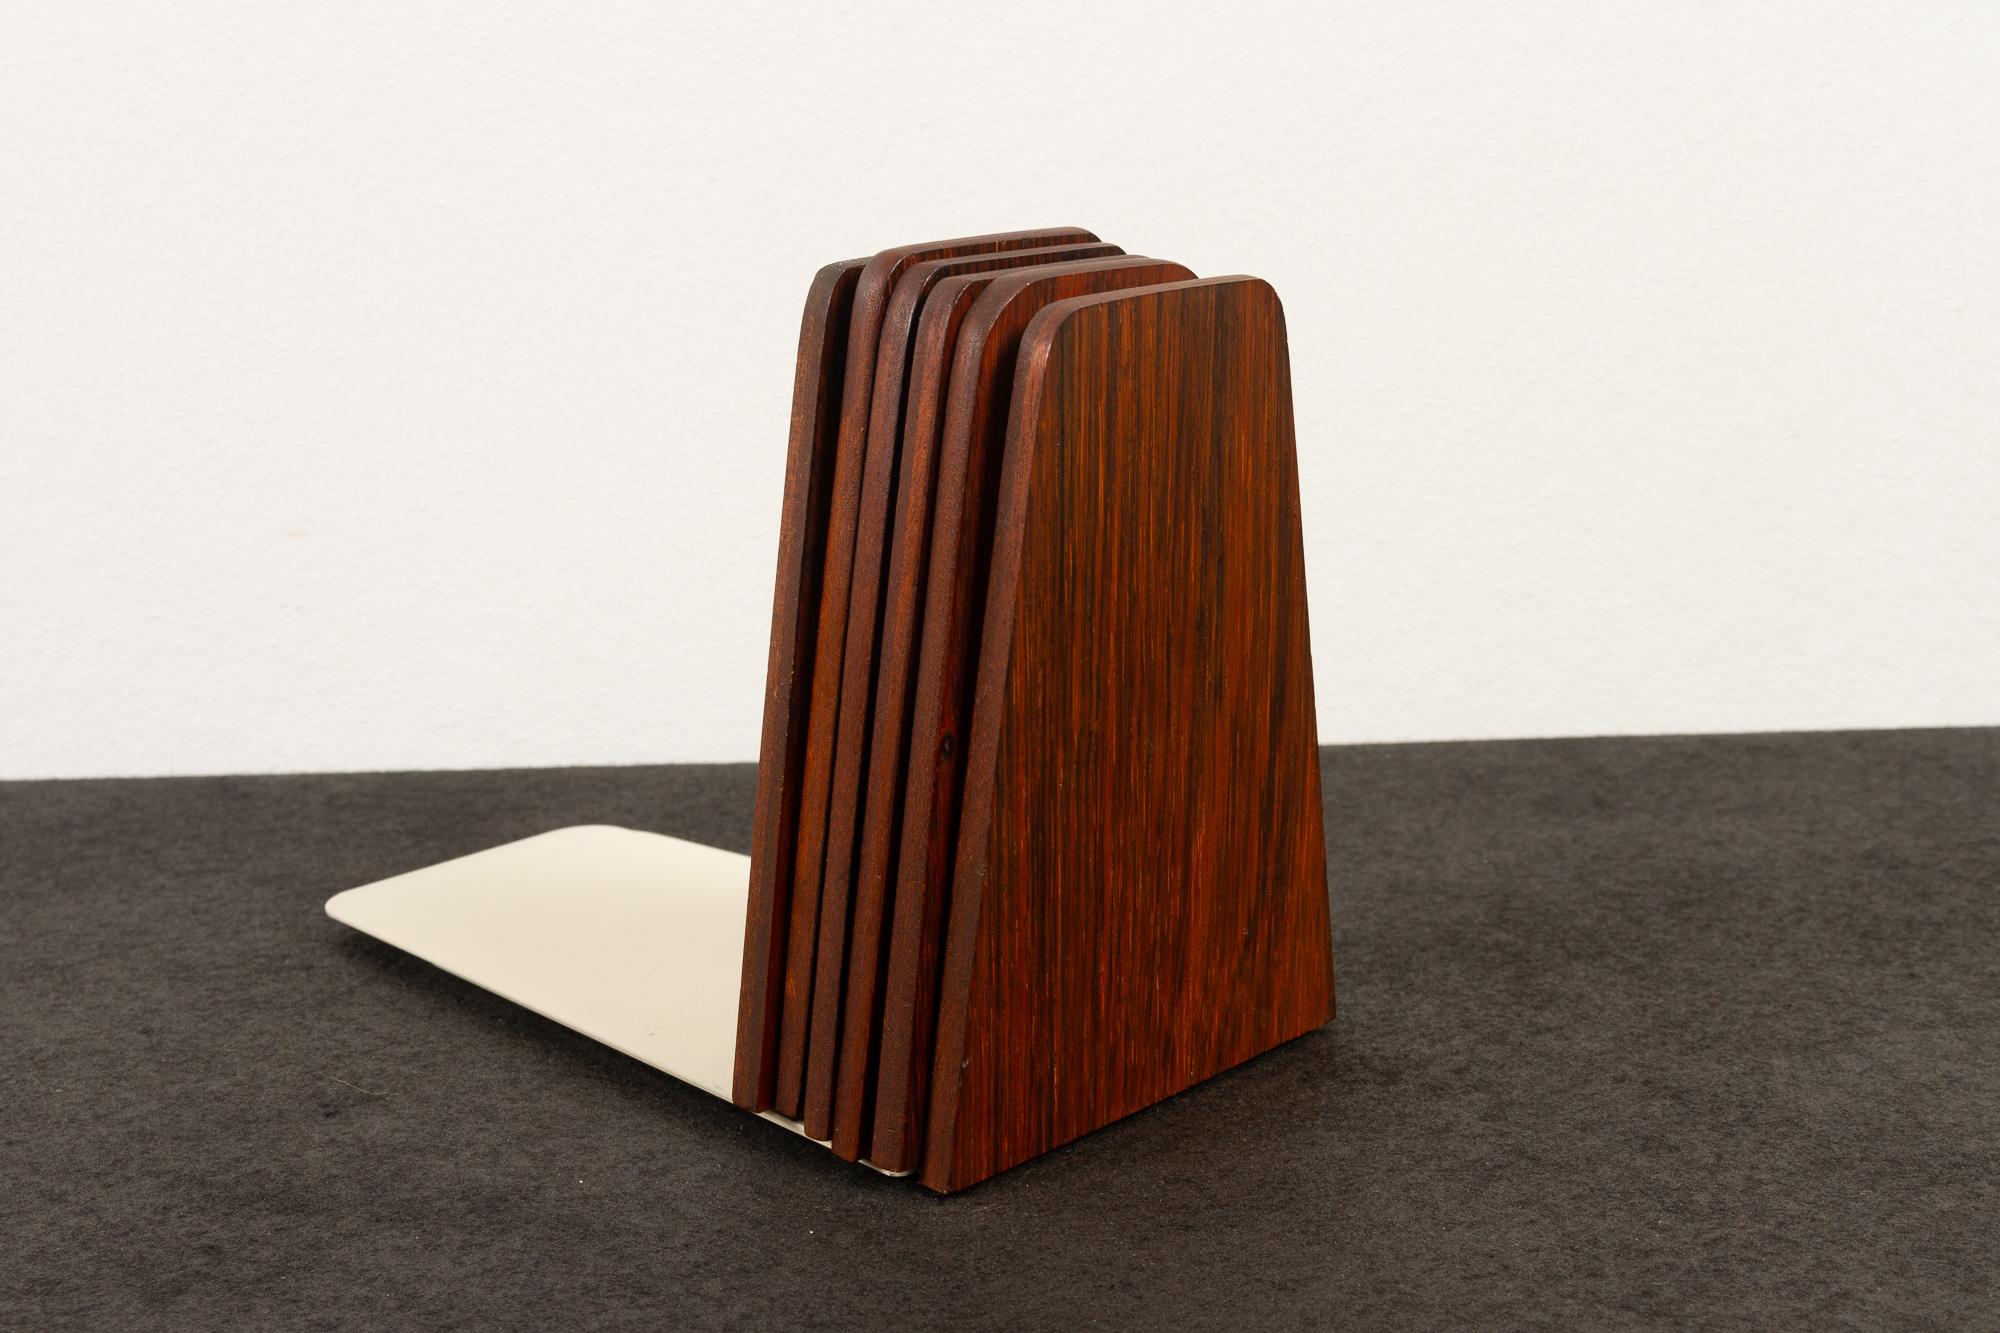 Mid-century bookends by Kai Kristiansen for FM 1960s, set of 6
Very decorative Danish modern bookends in rosewood and metal designed by Danish designer Kai Kristiansen for Feldballes Møbelfabrik.
Very good condition. Cleaned and polished.